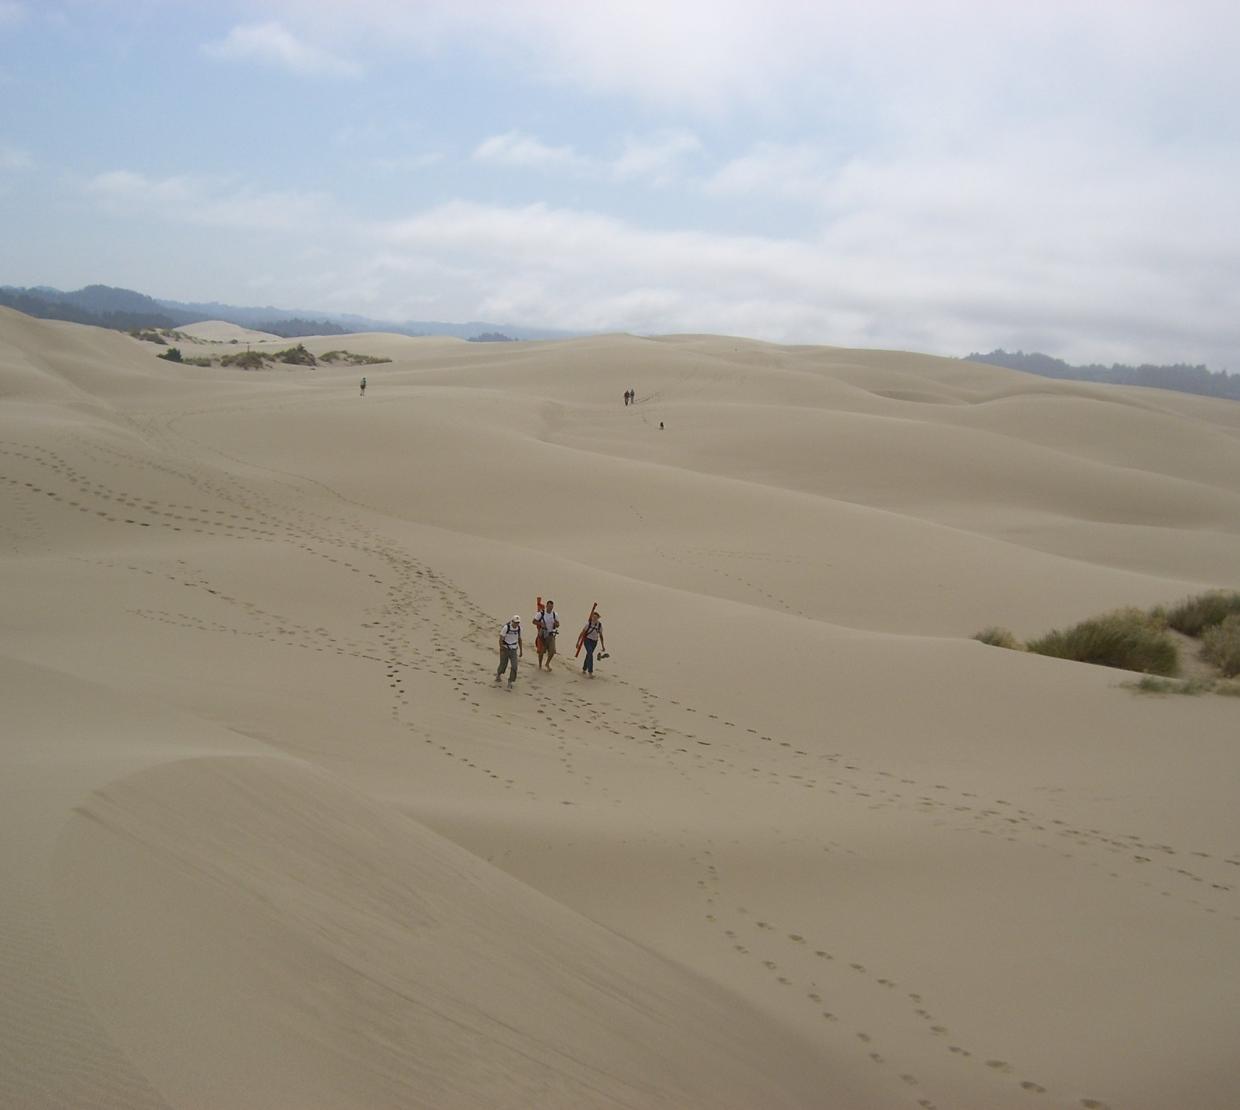 Shifting sands: protecting environments from dune migration